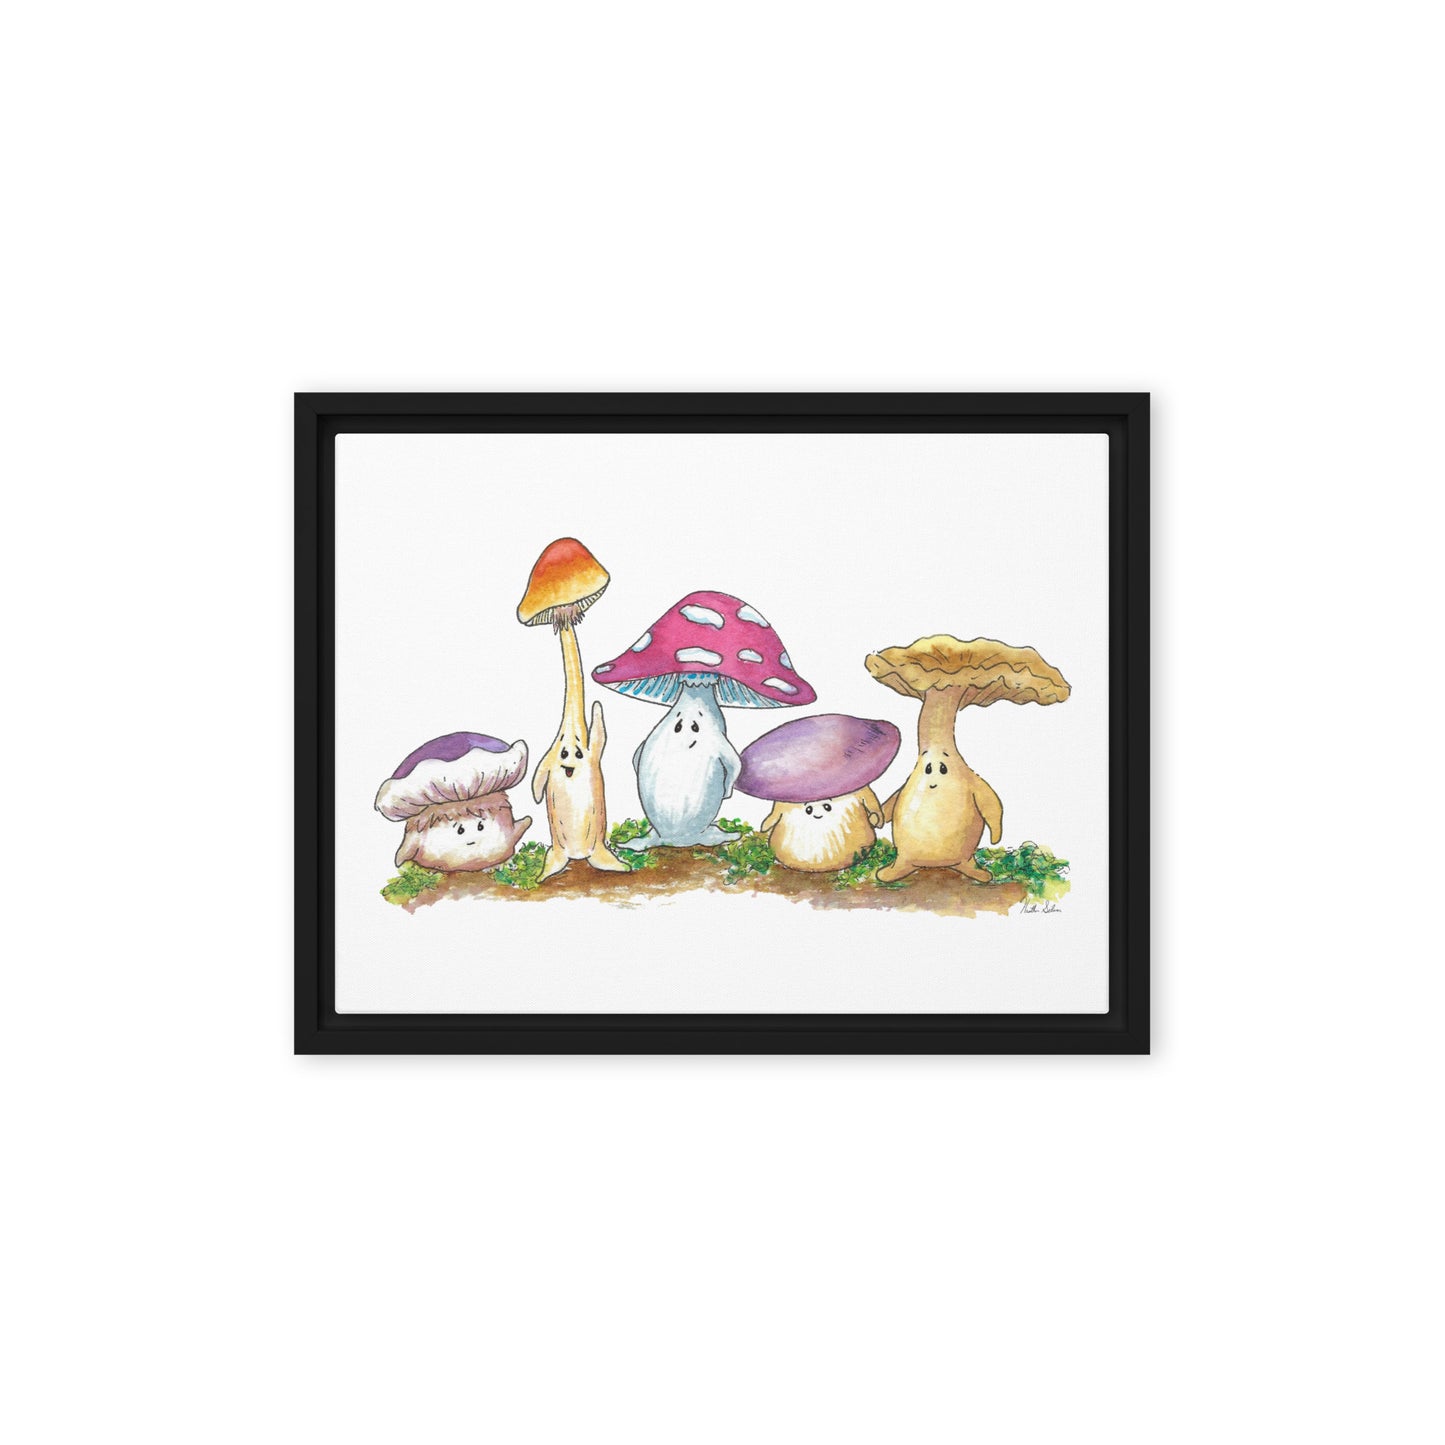 9 by 12 inch canvas print of Heather Silver's watercolor painting, Mushy and Friends. Framed in a black pine wood frame that gives it a floating canvas effect.